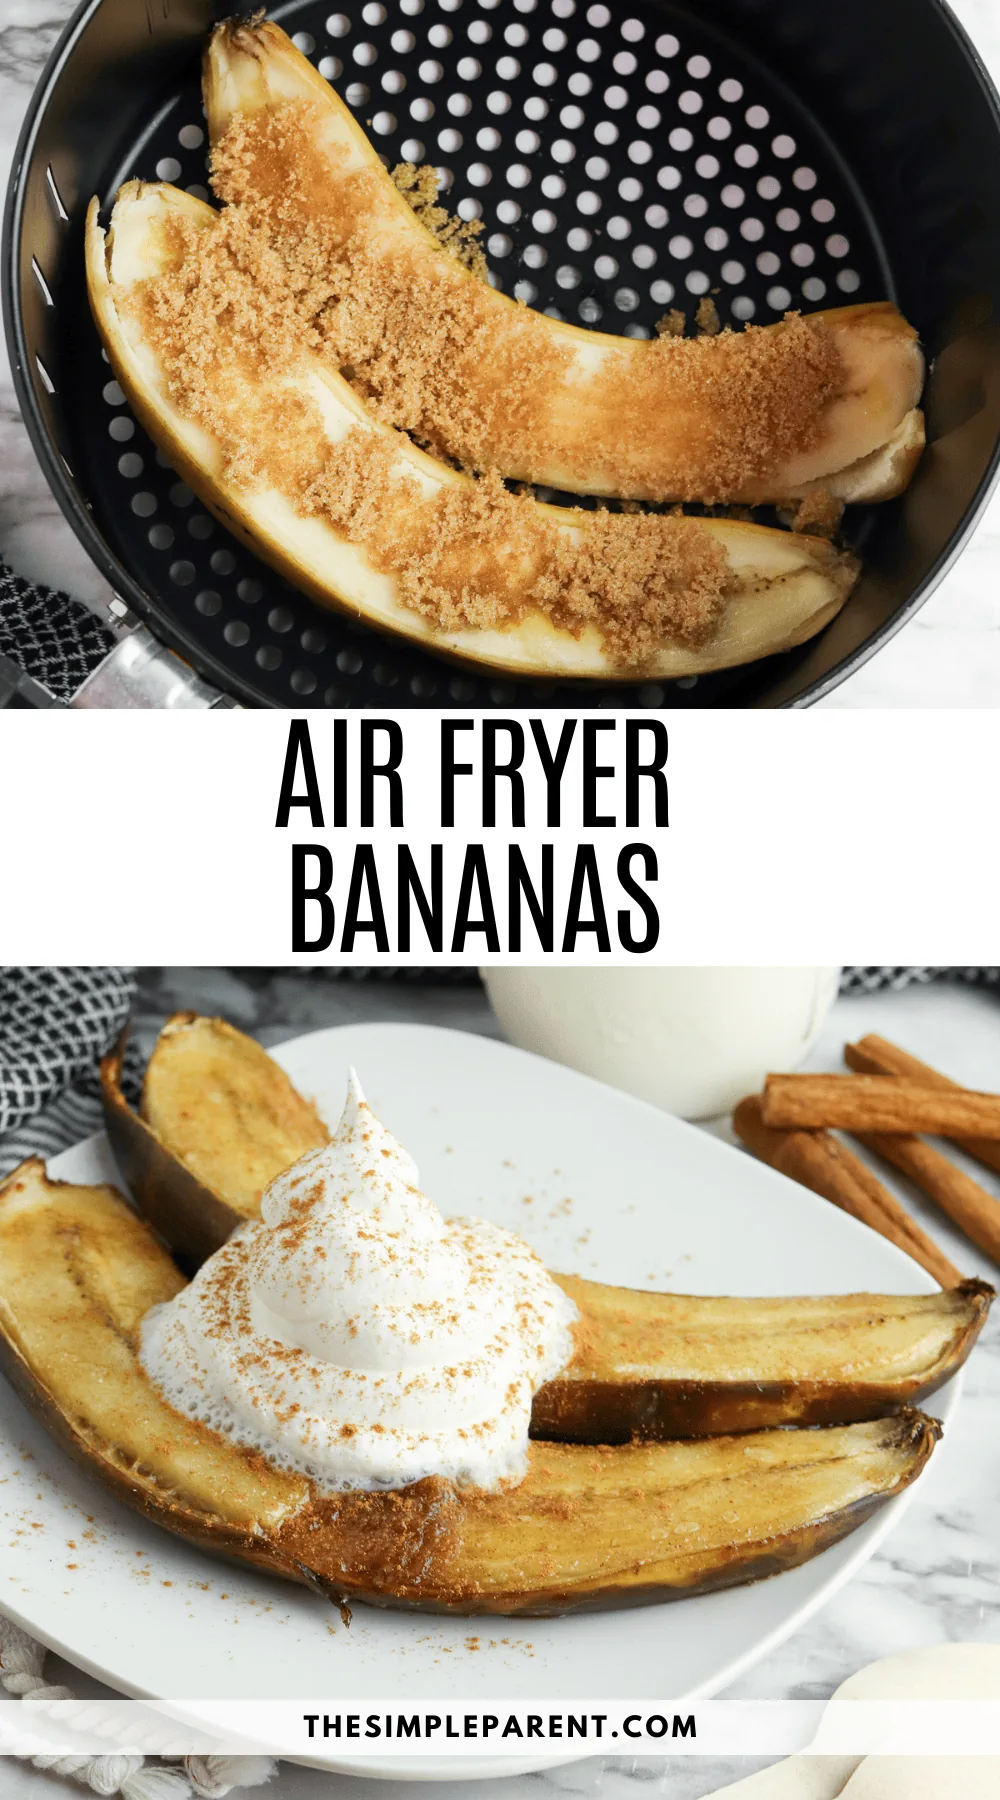 Make caramelized bananas in the air fryer